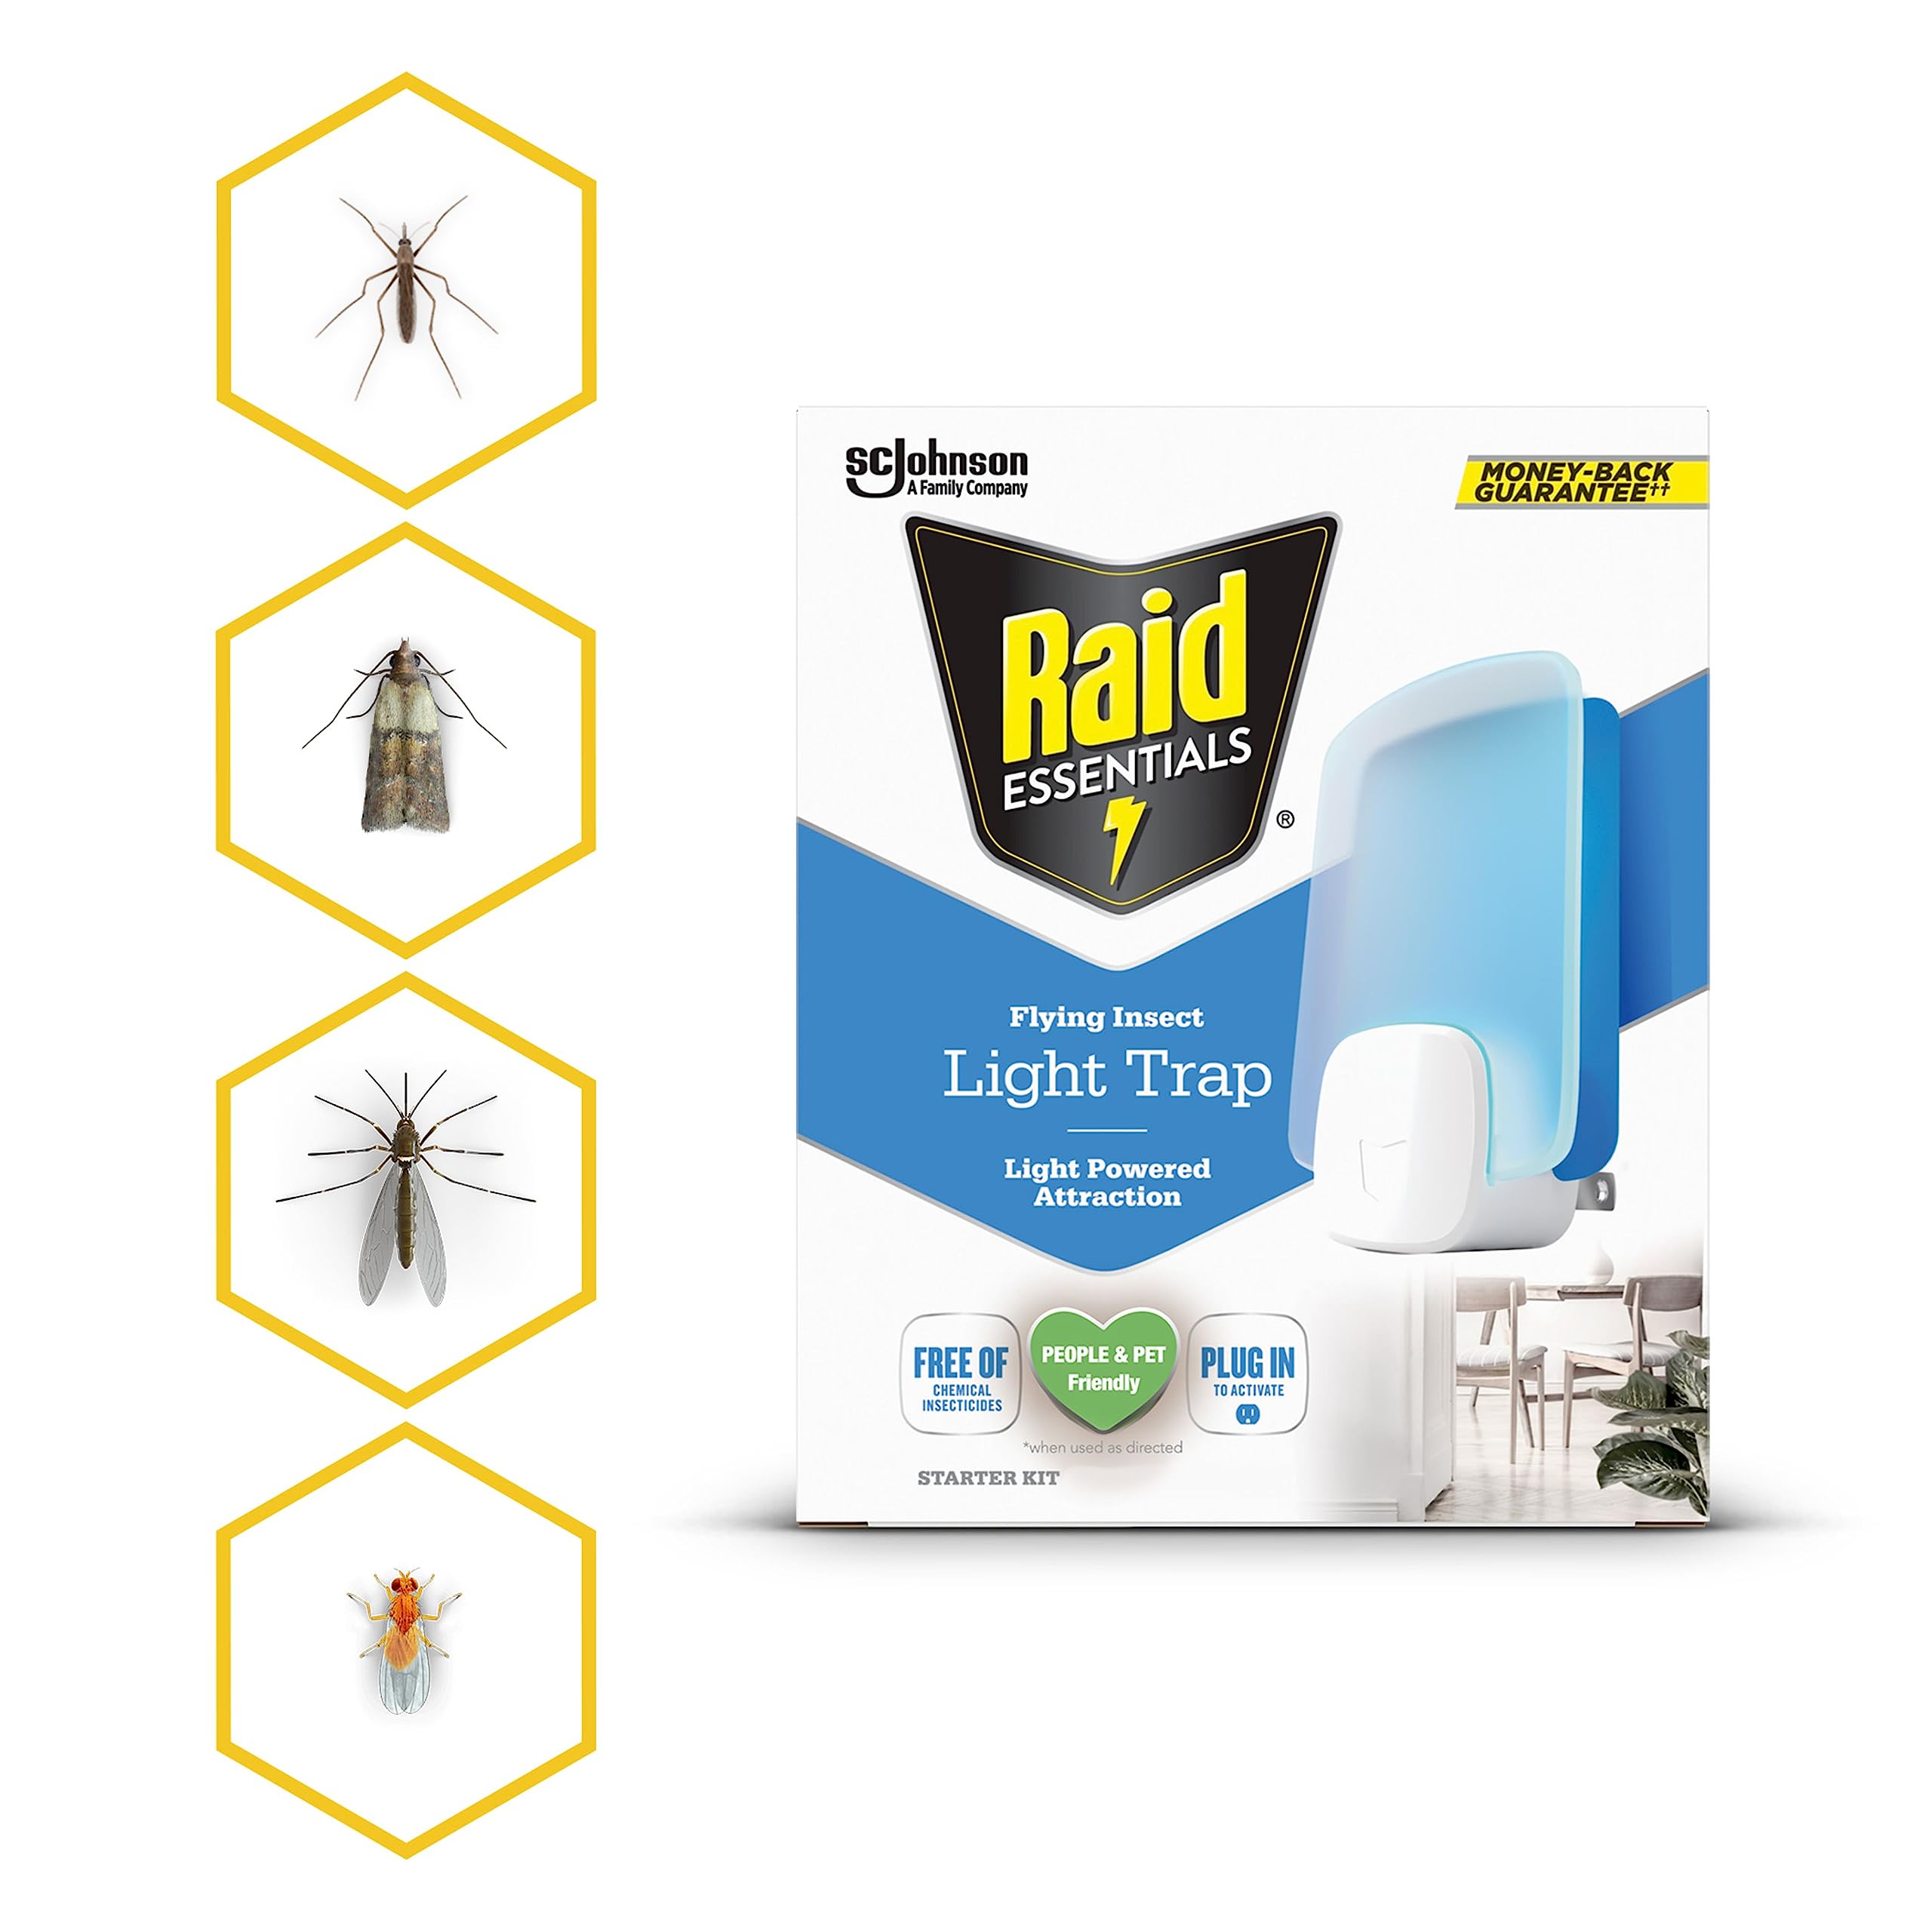 Raid Essentials Flying Insect Light Trap Refills, 2 Light Trap Refill Cartridges, Featuring Light Powered Attraction